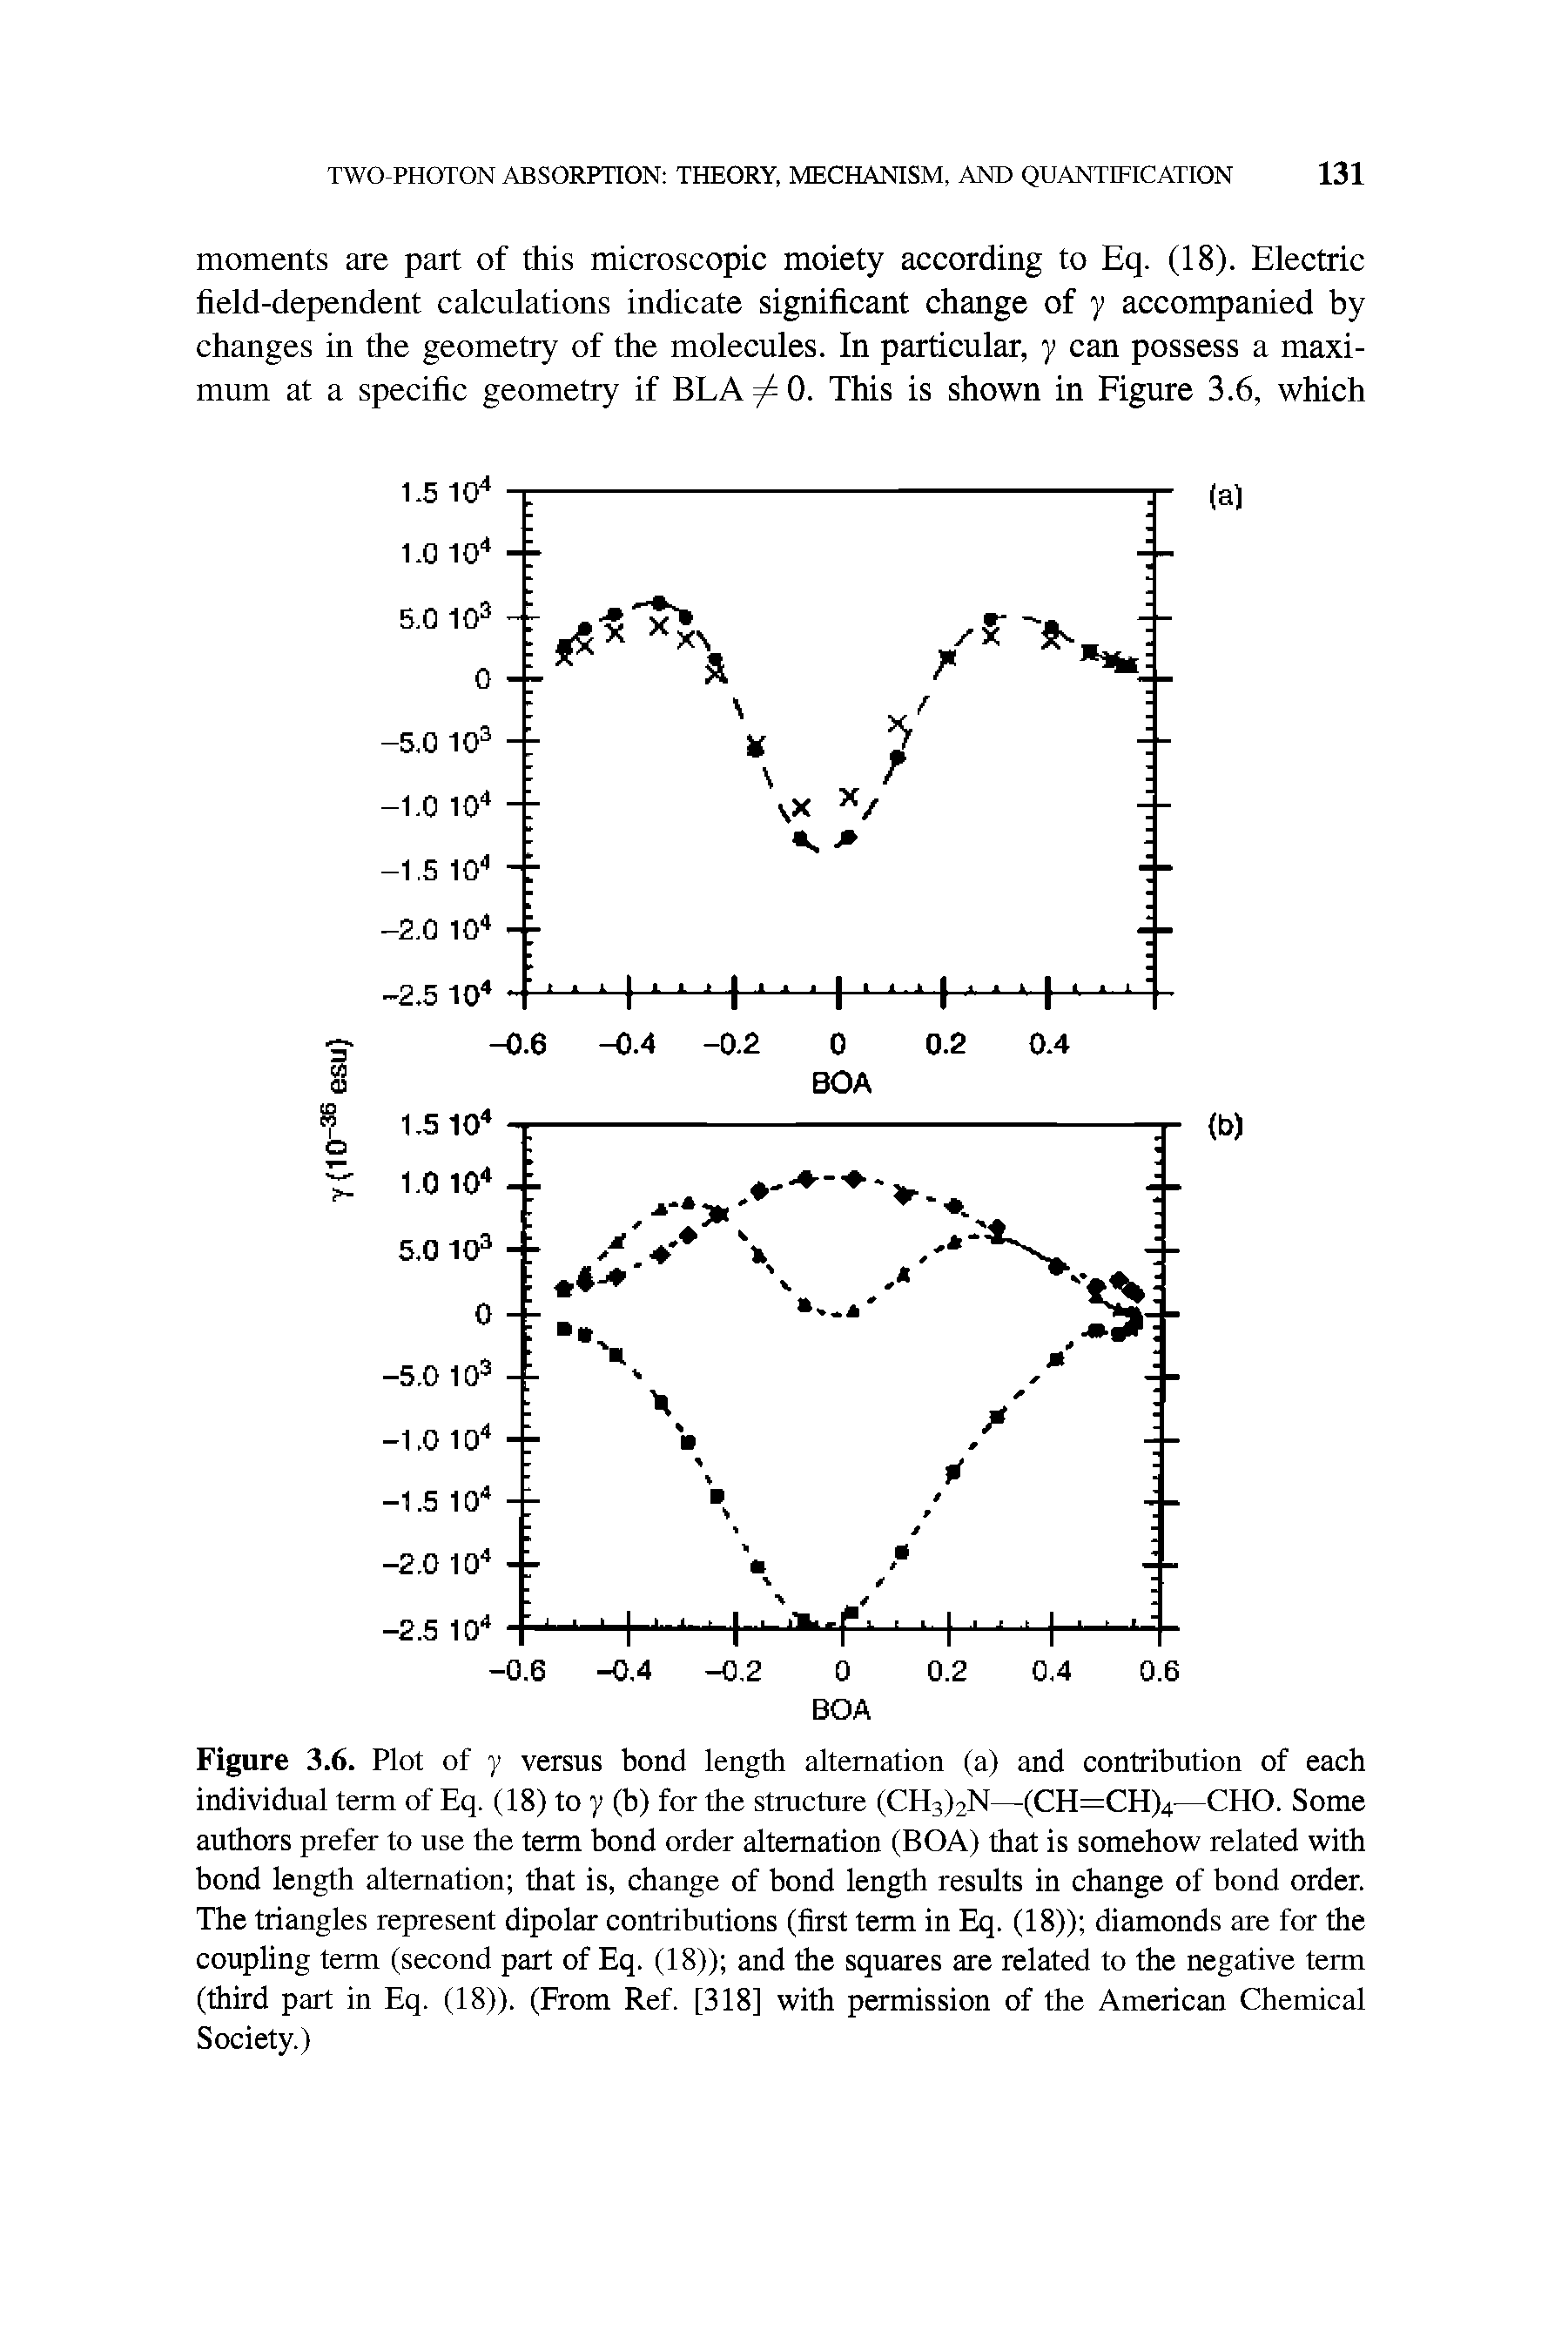 Figure 3.6. Plot of y versus bond length alternation (a) and contribution of each individual term of Eq. (18) to y (b) for the structure (CH3)2N—(CH=CH)4—CHO. Some authors prefer to use the term bond order alternation (BOA) that is somehow related with bond length alternation that is, change of bond length results in change of bond order. The triangles represent dipolar contributions (first term in Eq. (18)) diamonds are for the coupling term (second part of Eq. (18)) and the squares are related to the negative term (third part in Eq. (18)). (From Ref. [318] with permission of the American Chemical Society.)...